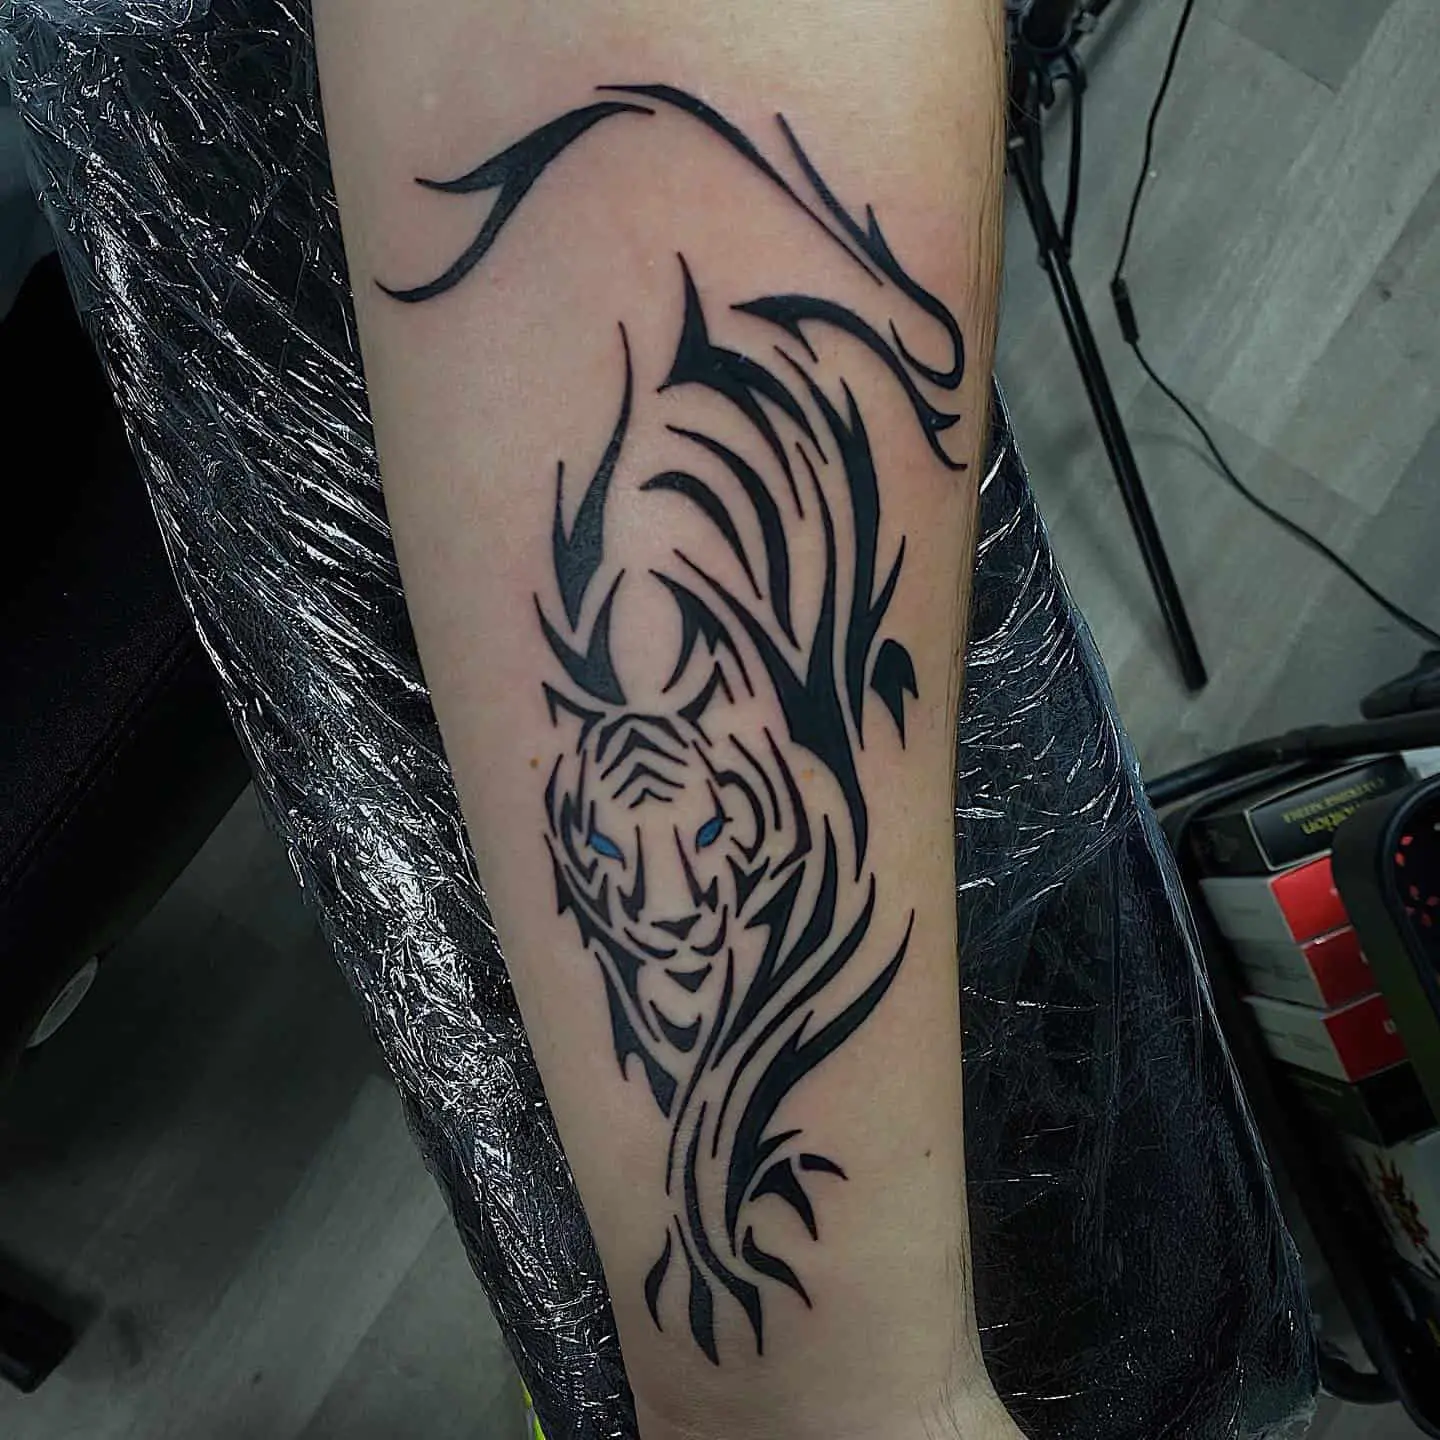 Tribal tiger tattoo by house.inks